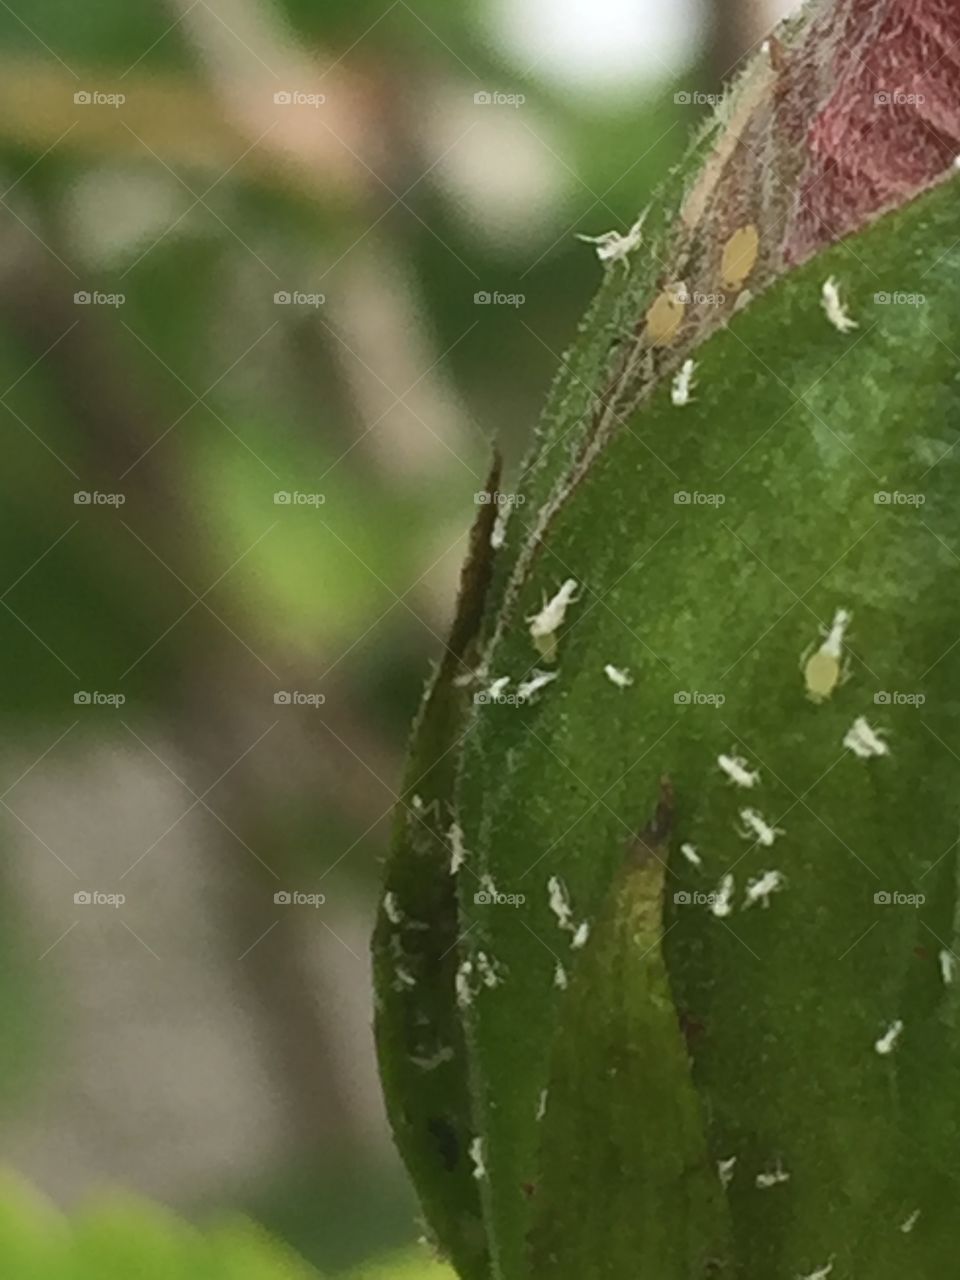 This photo taken from my garden with my iPhone. Aphids are seen on the flower.